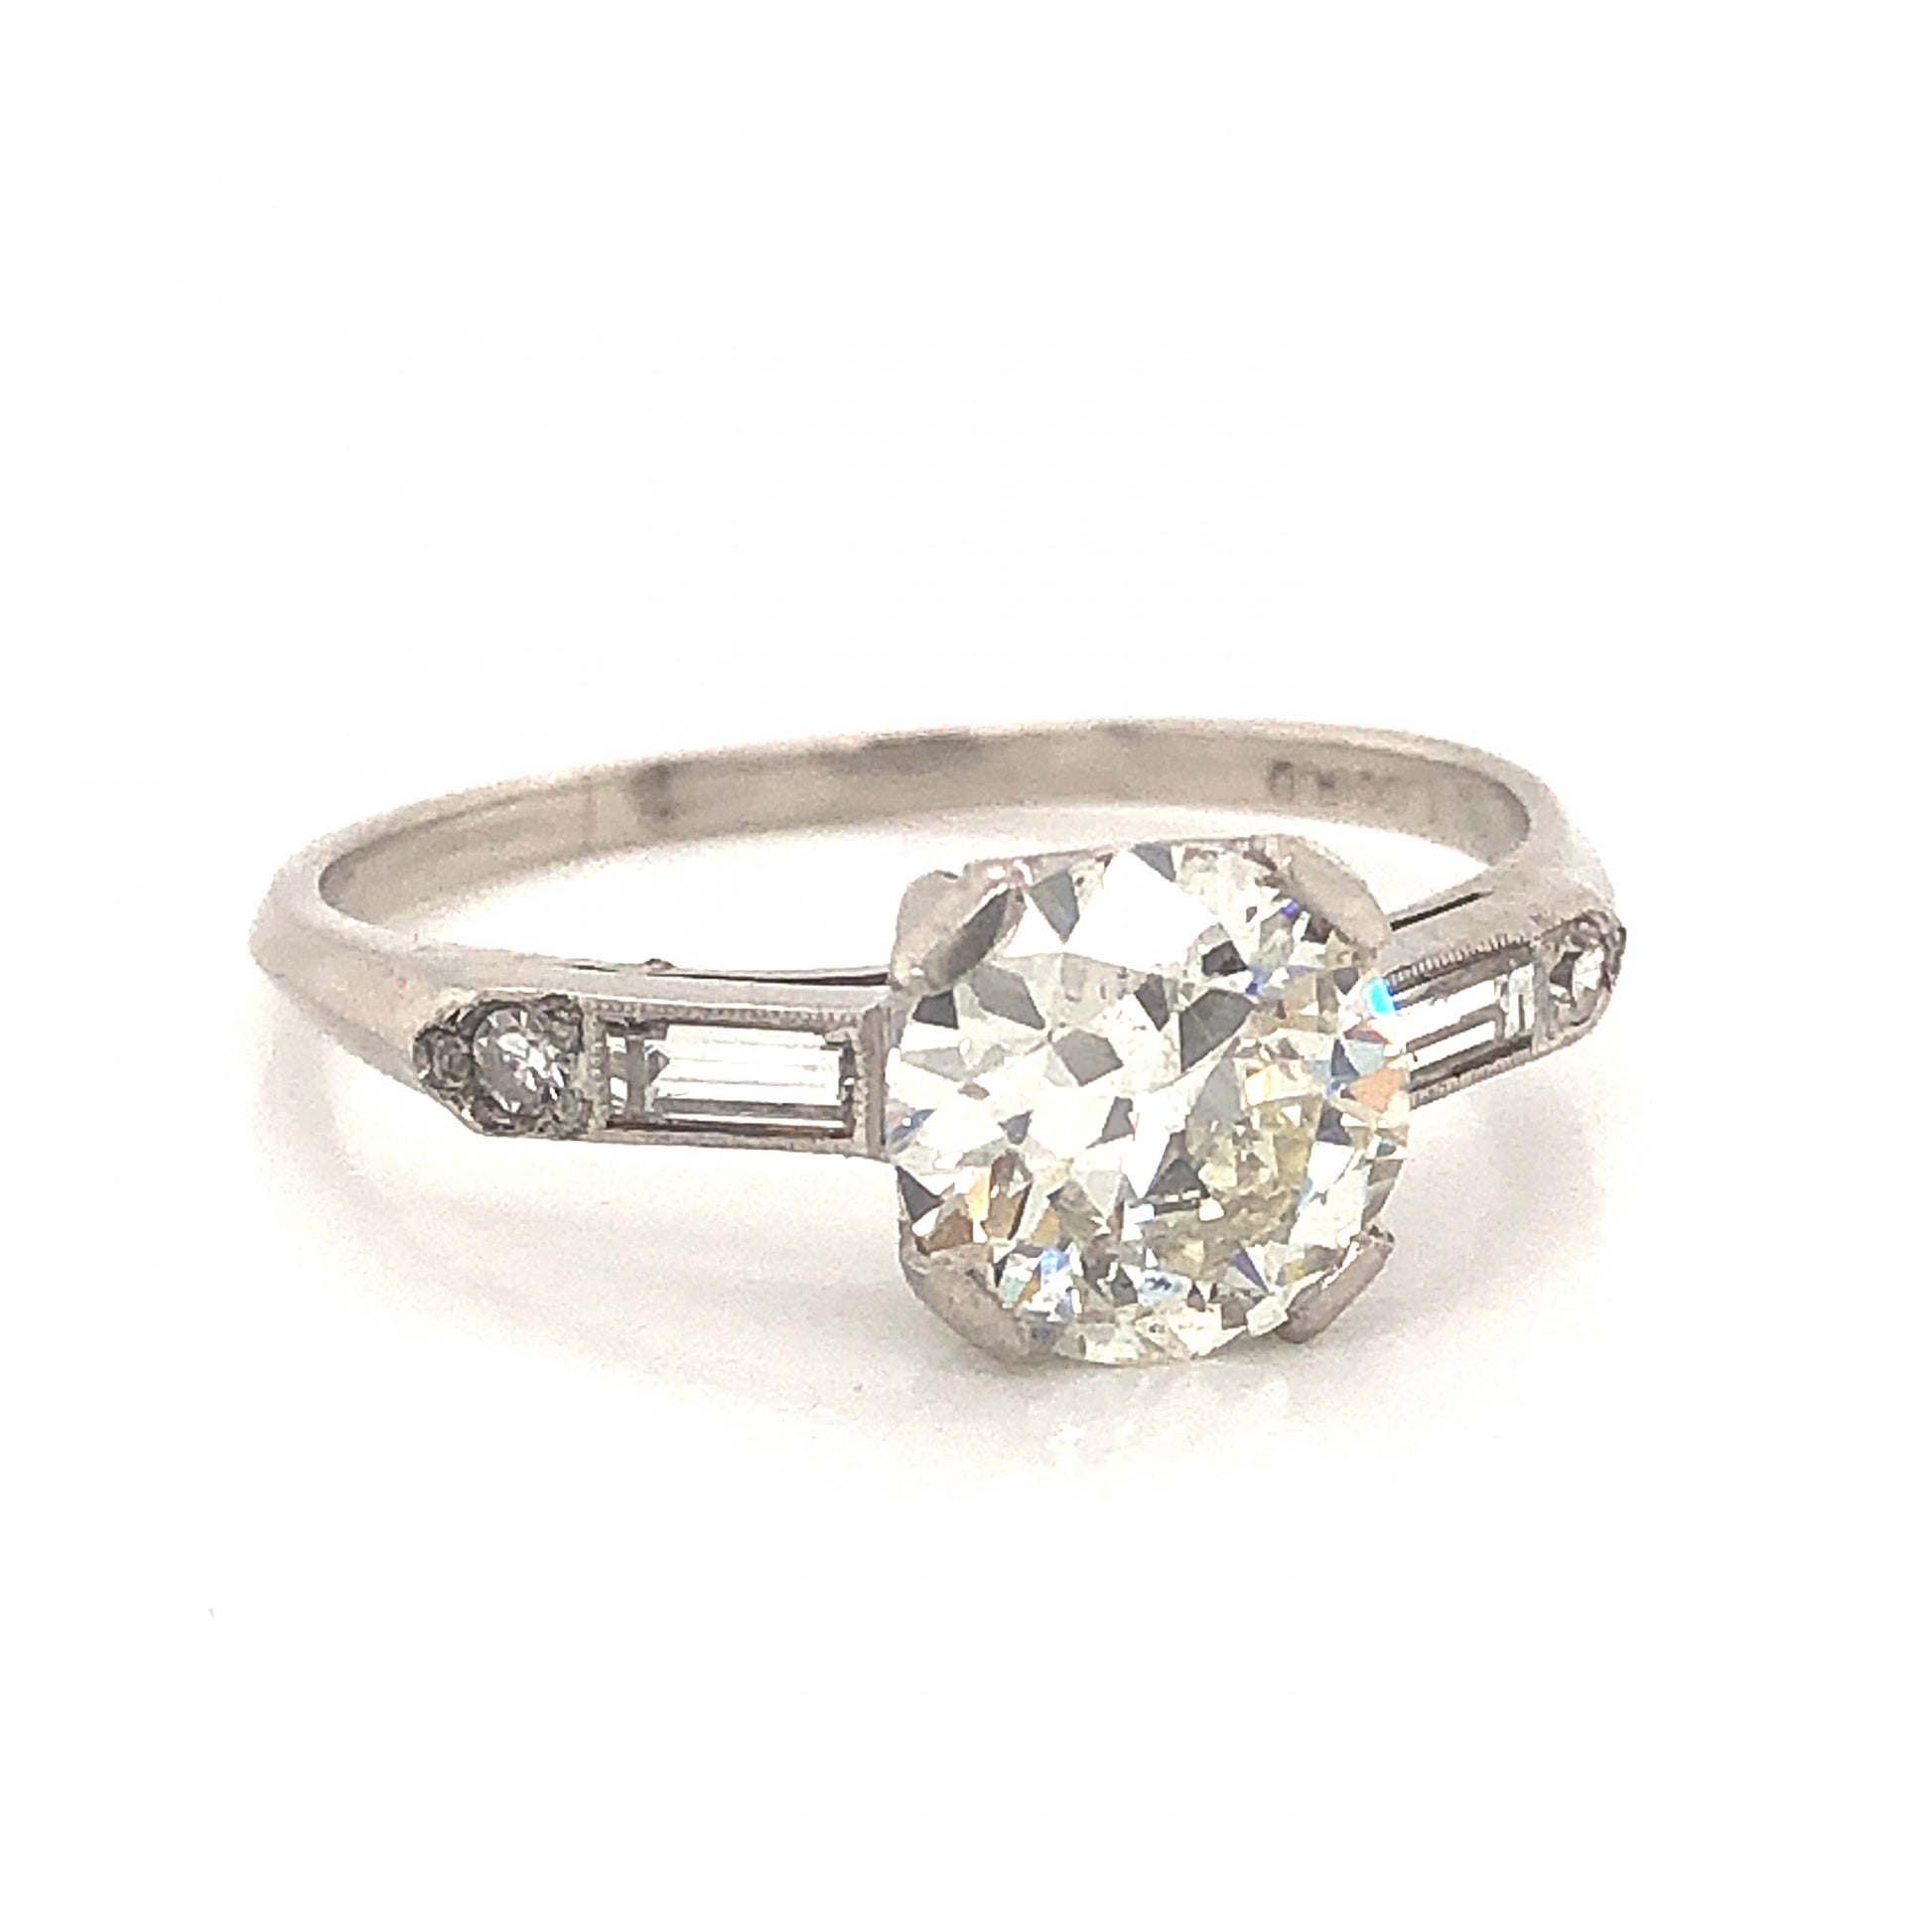 1.14 Art Deco Diamond Engagement Ring in PlatinumComposition: PlatinumRing Size: 7Total Diamond Weight: 1.47 ctTotal Gram Weight: 3.3 gInscription: 900 PLAT 100 IRID